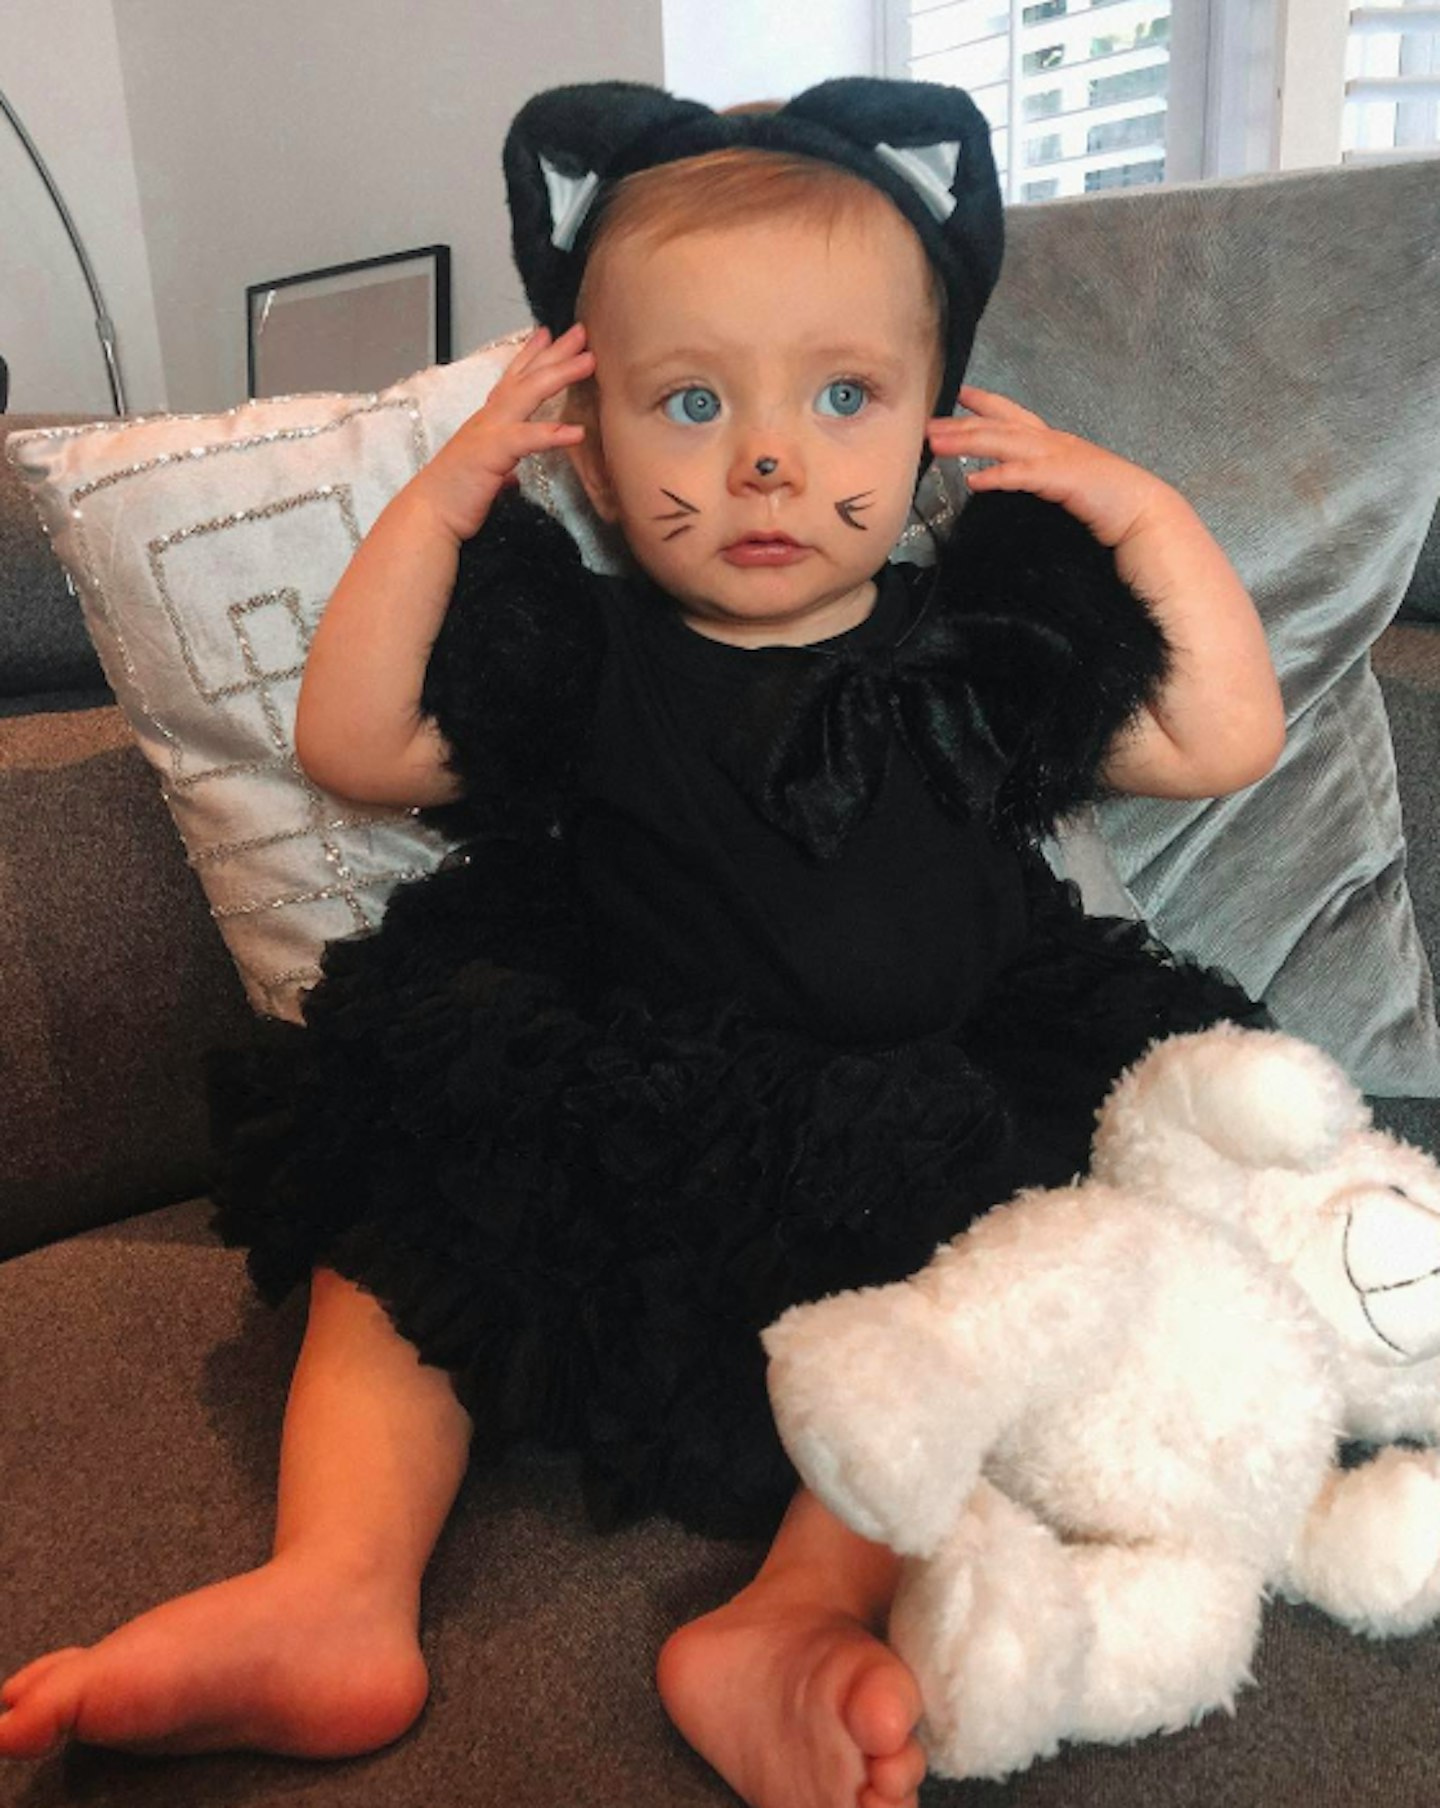 Celebrity kids outfits Halloween 2018